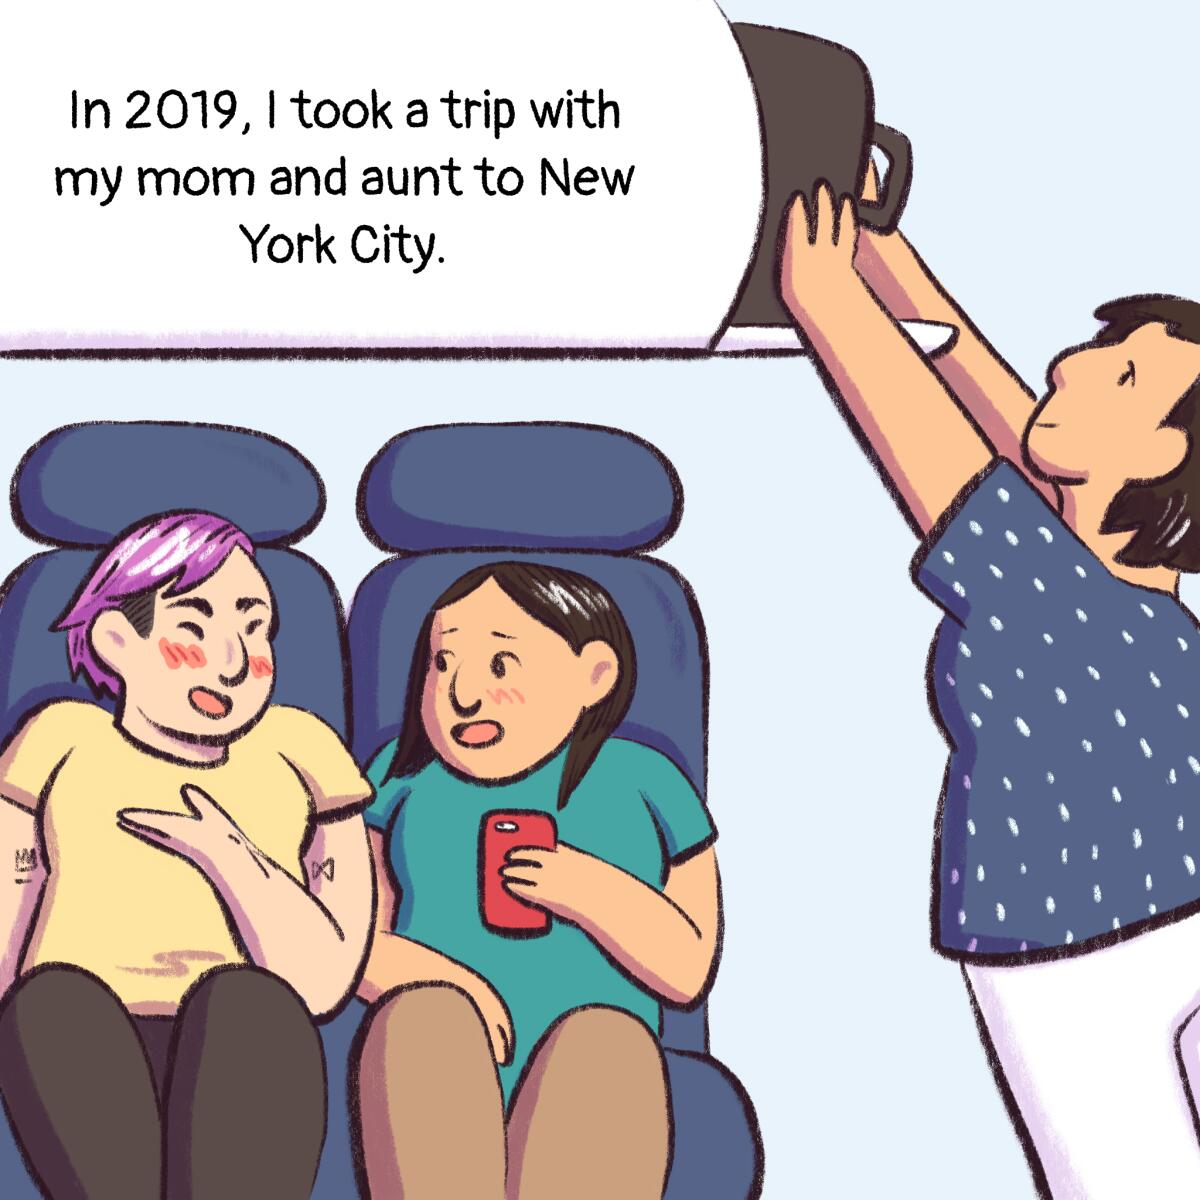 in 2019, i took a trip with my mom and aunt to new york city